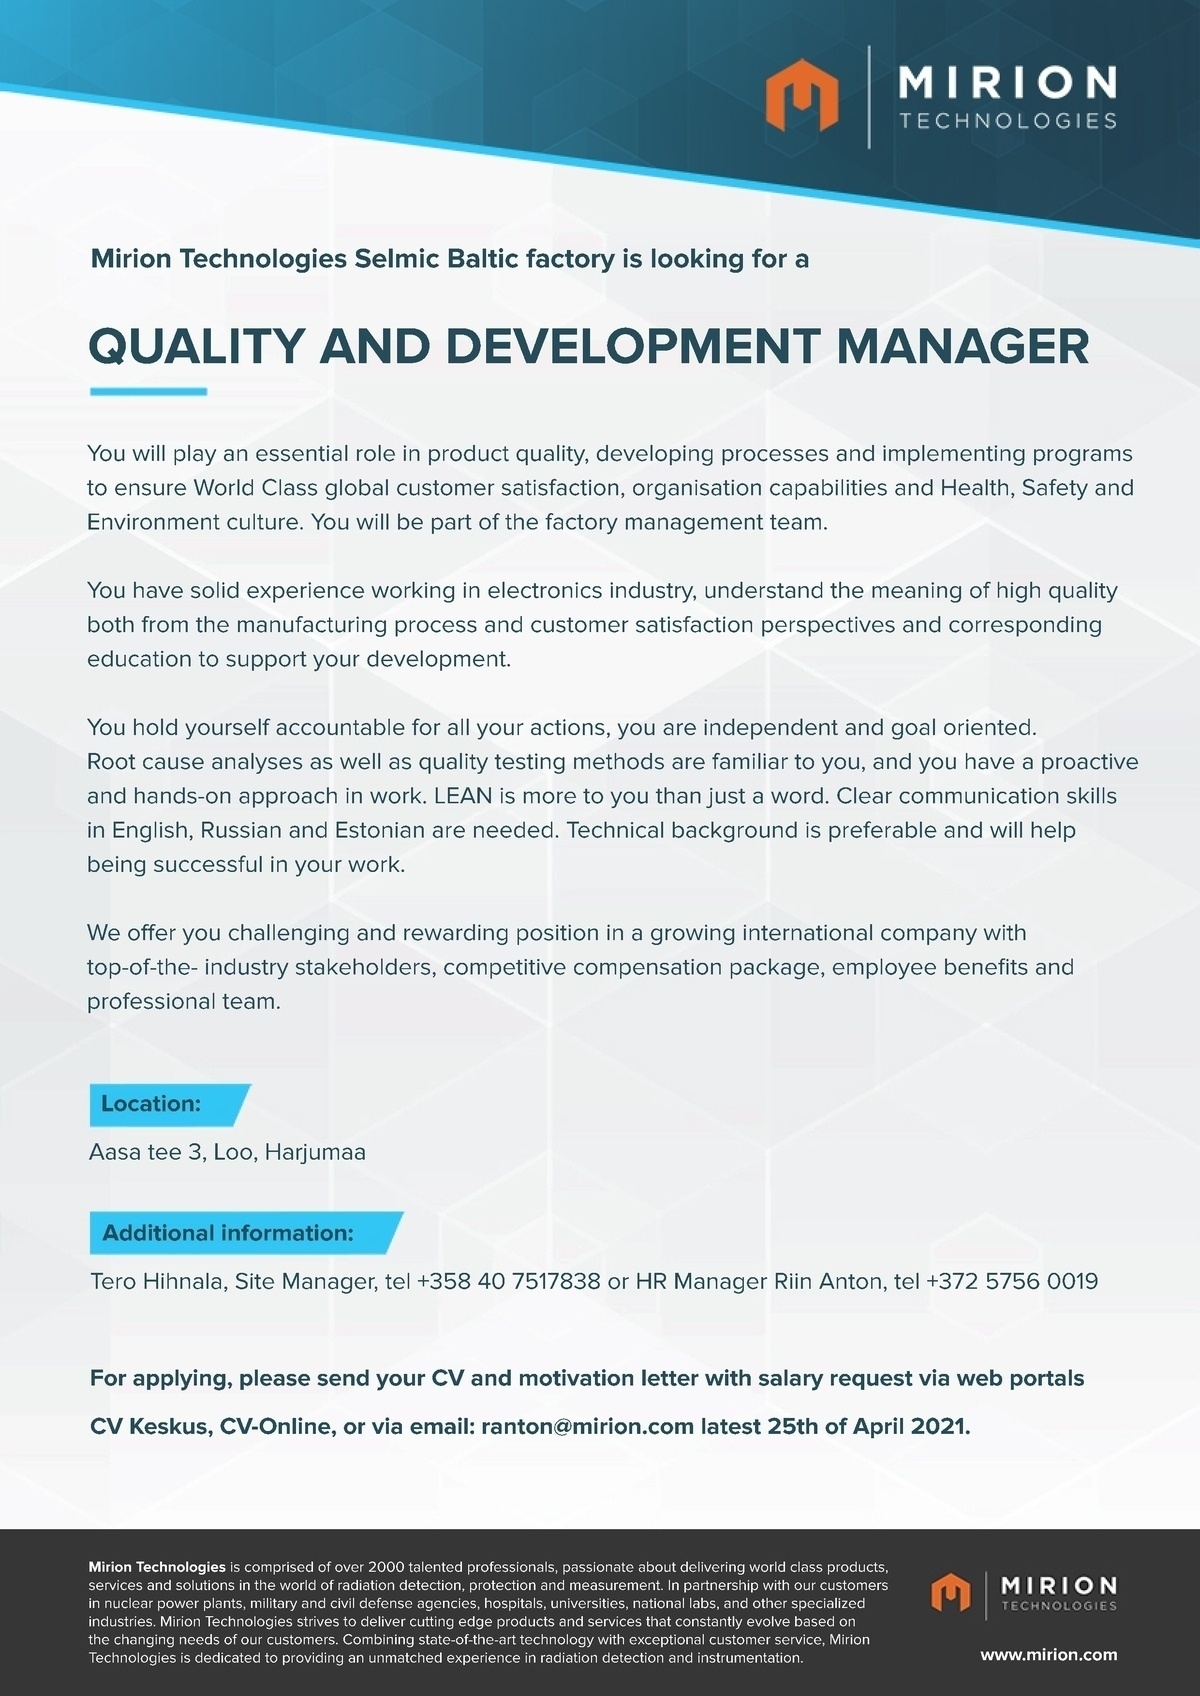 MIRION TECHNOLOGIES SELMIC BALTIC OÜ QUALITY AND DEVELOPMENT MANAGER